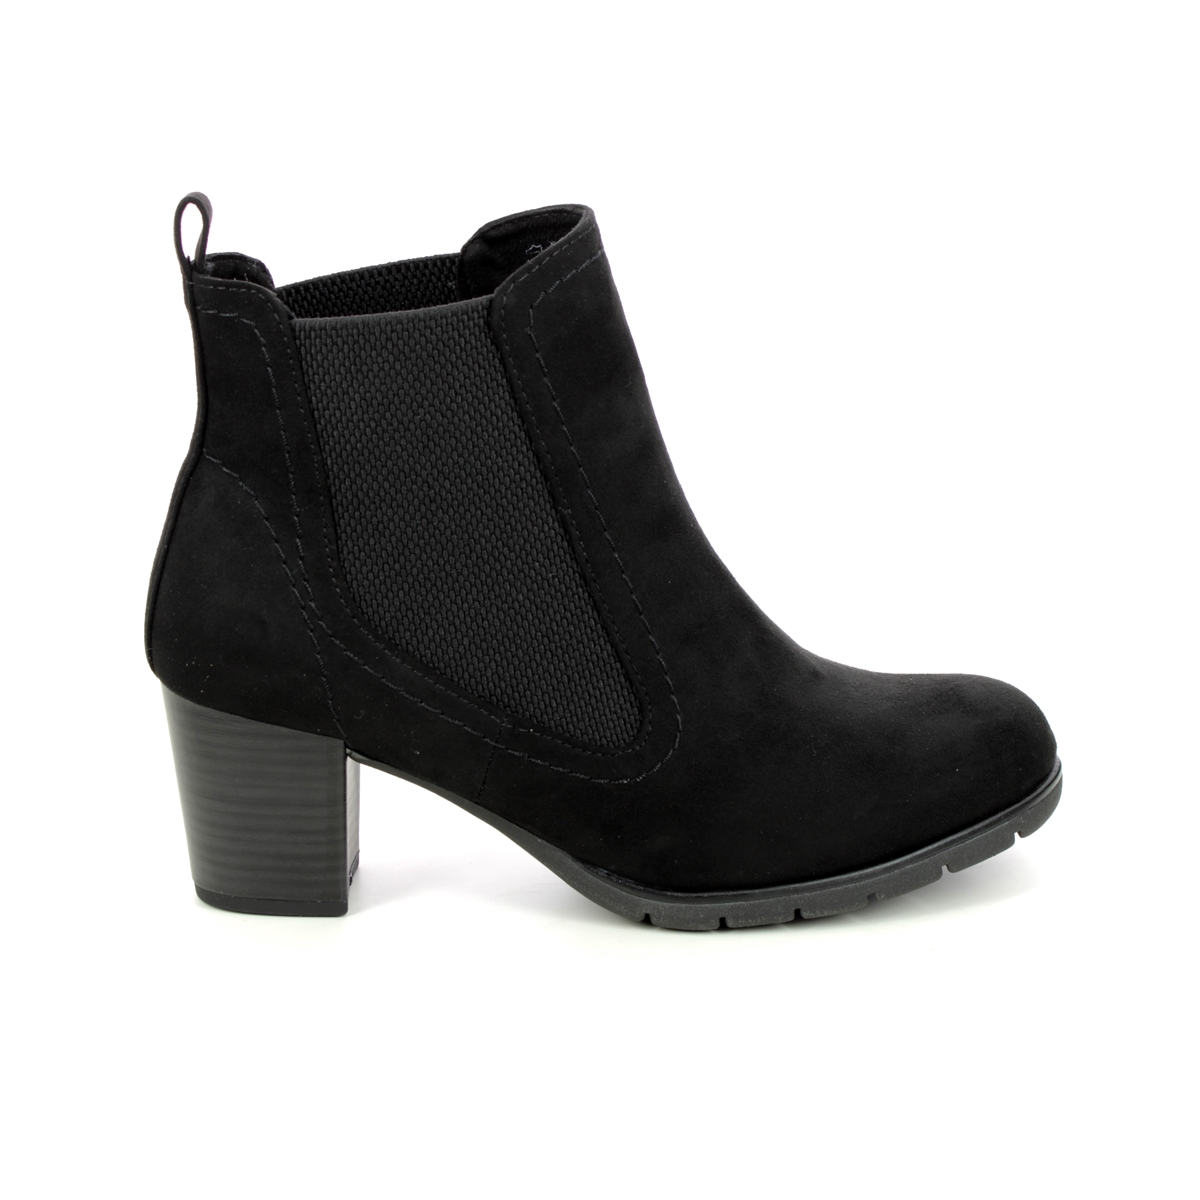 Marco Tozzi Pesa 05 Black Womens ankle boots 25355-41-001